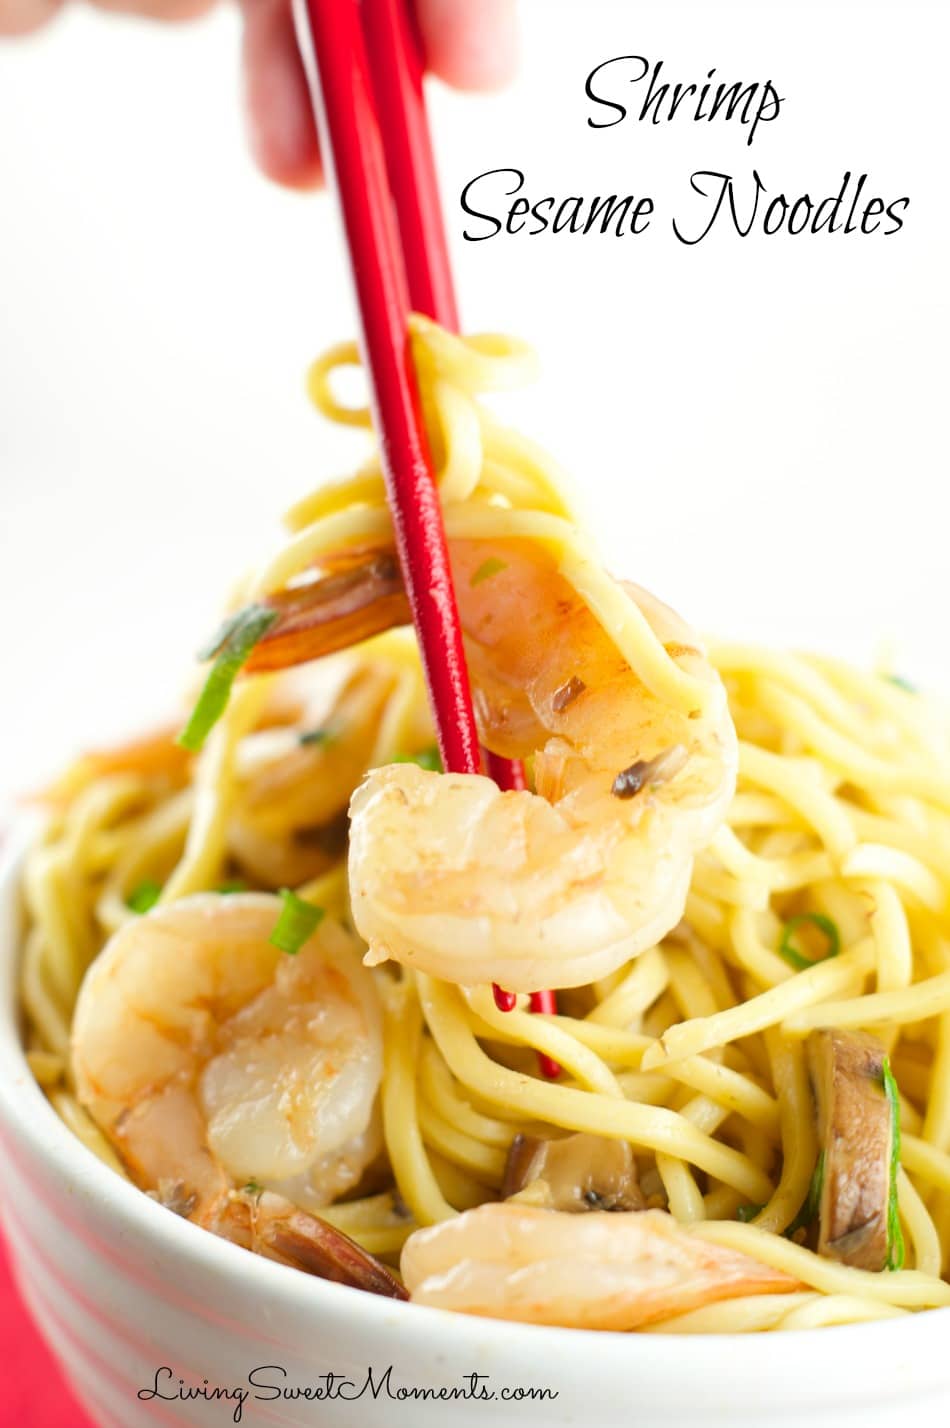 Sesame Shrimp Noodles - Easy and delicious weeknight dinner idea. Shrimp and mushrooms tossed together with egg noodles with a delicious sesame sauce. Definitely a crowd pleaser 